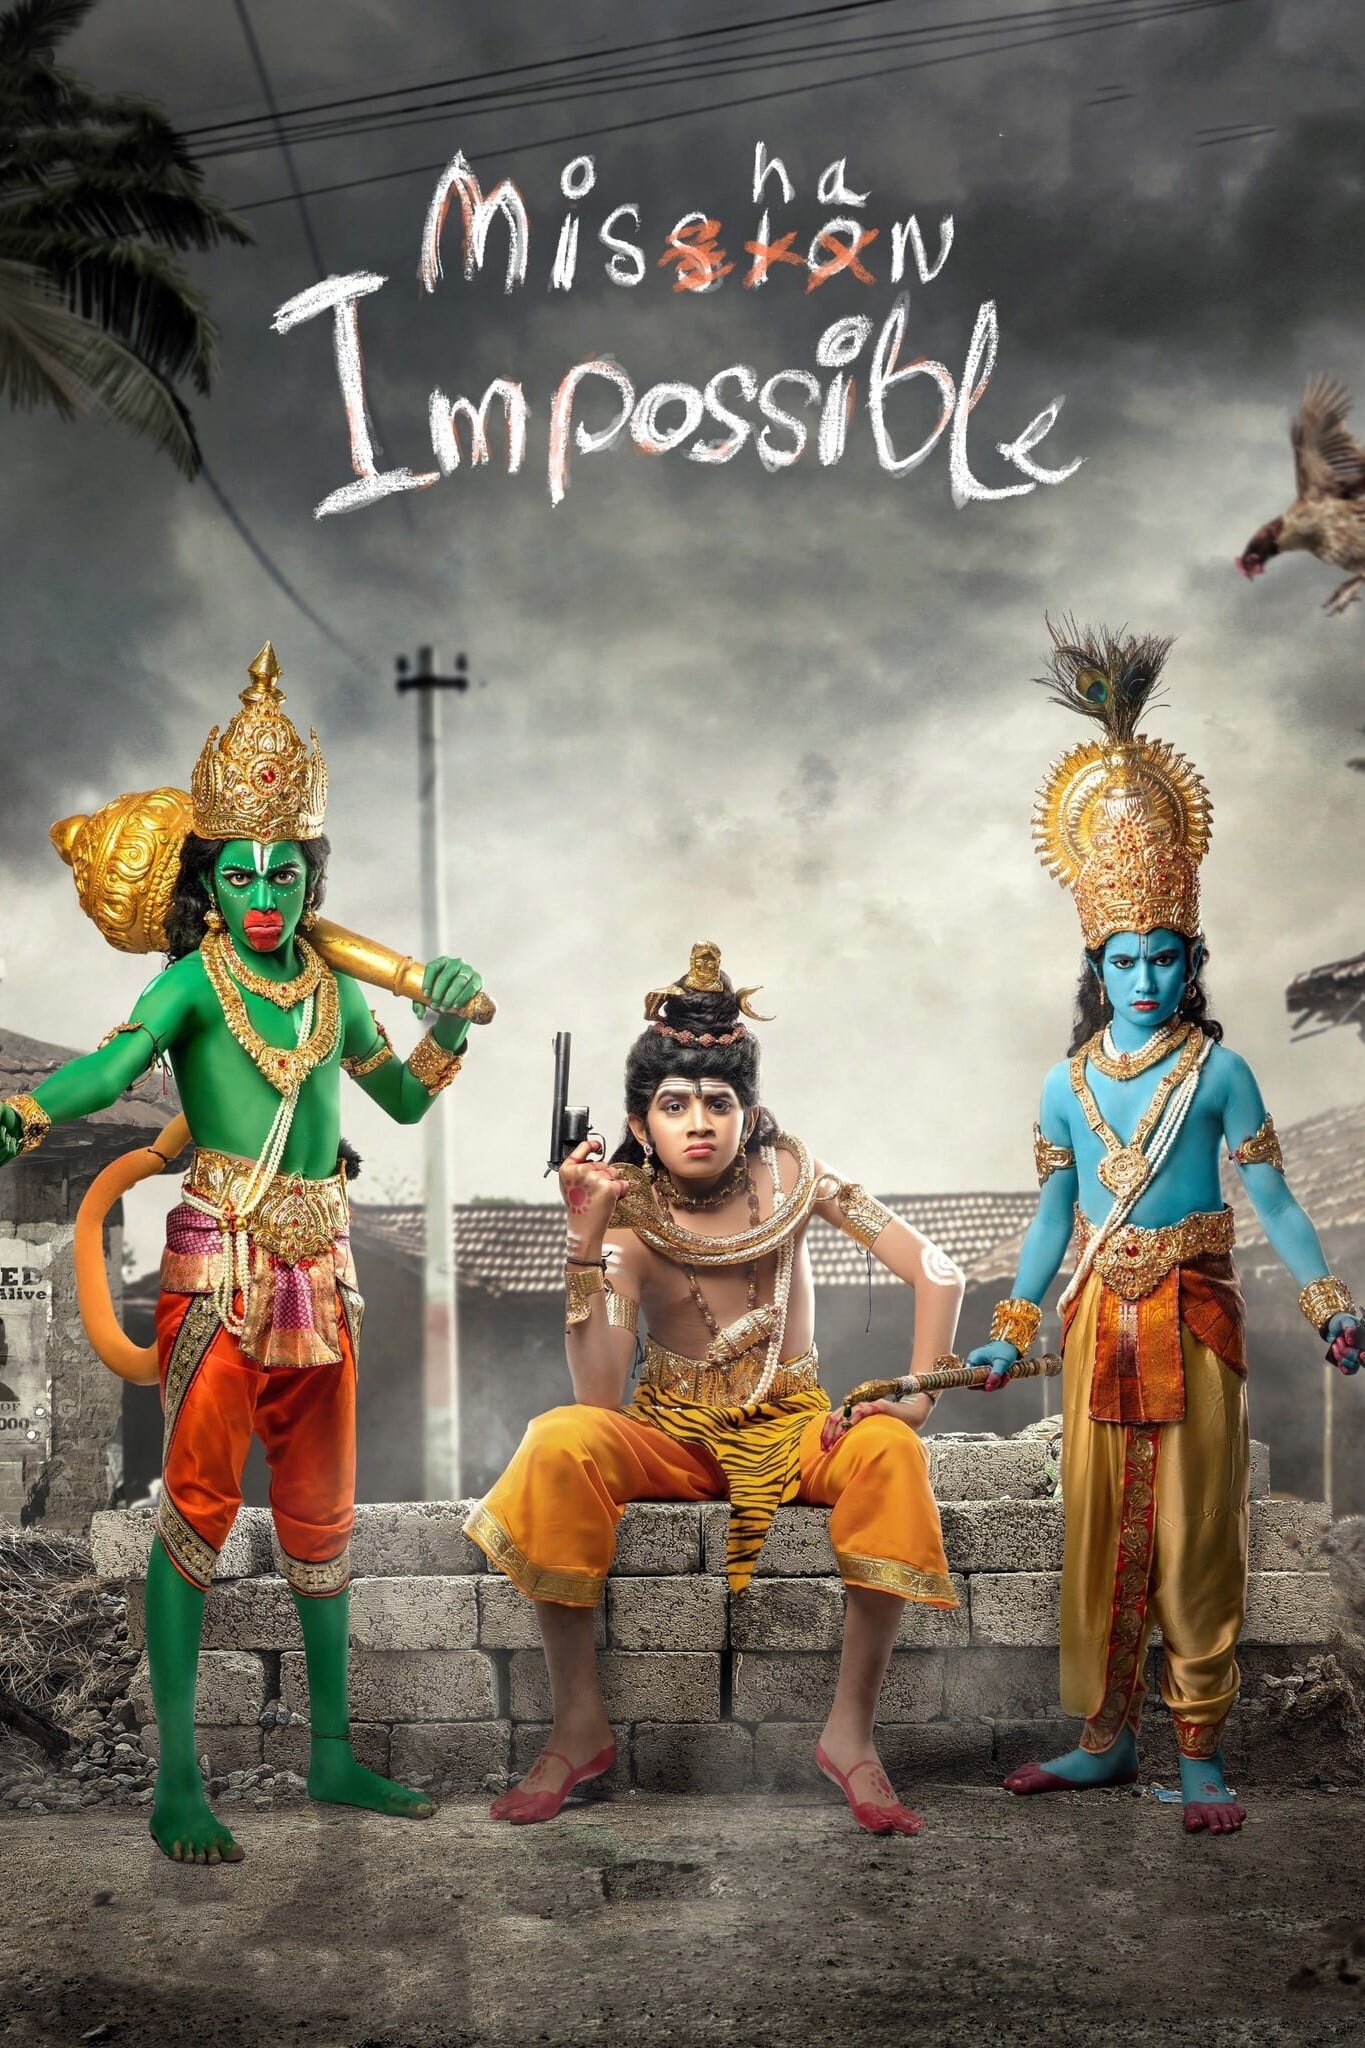 Poster for the movie "Mishan Impossible"